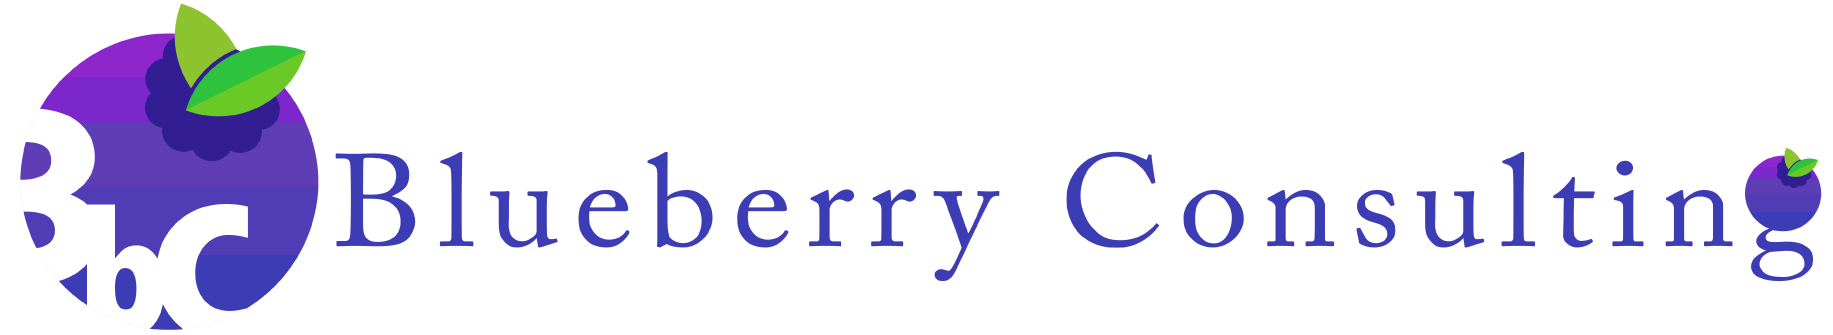 Blueberries Consulting